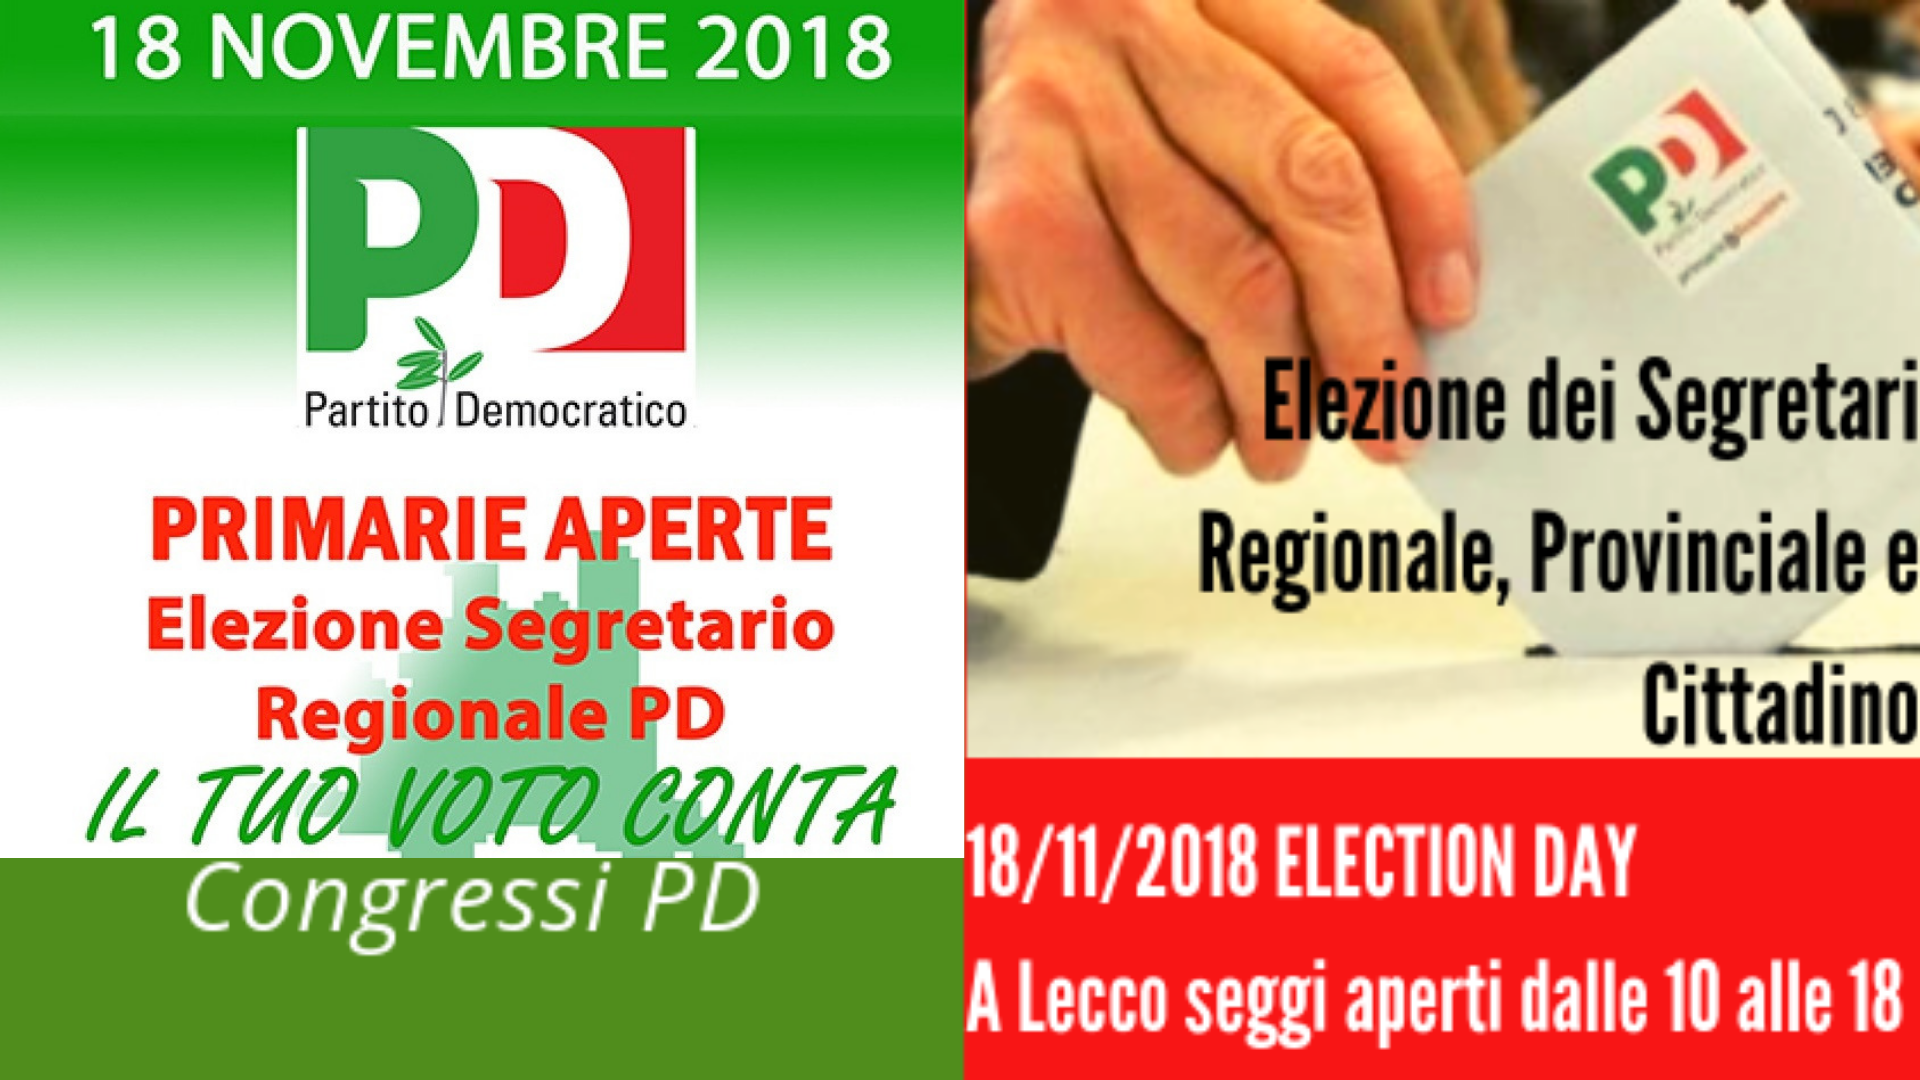 https://lecconews.news/wp/wp-content/uploads/2018/11/post-evento-voto.png